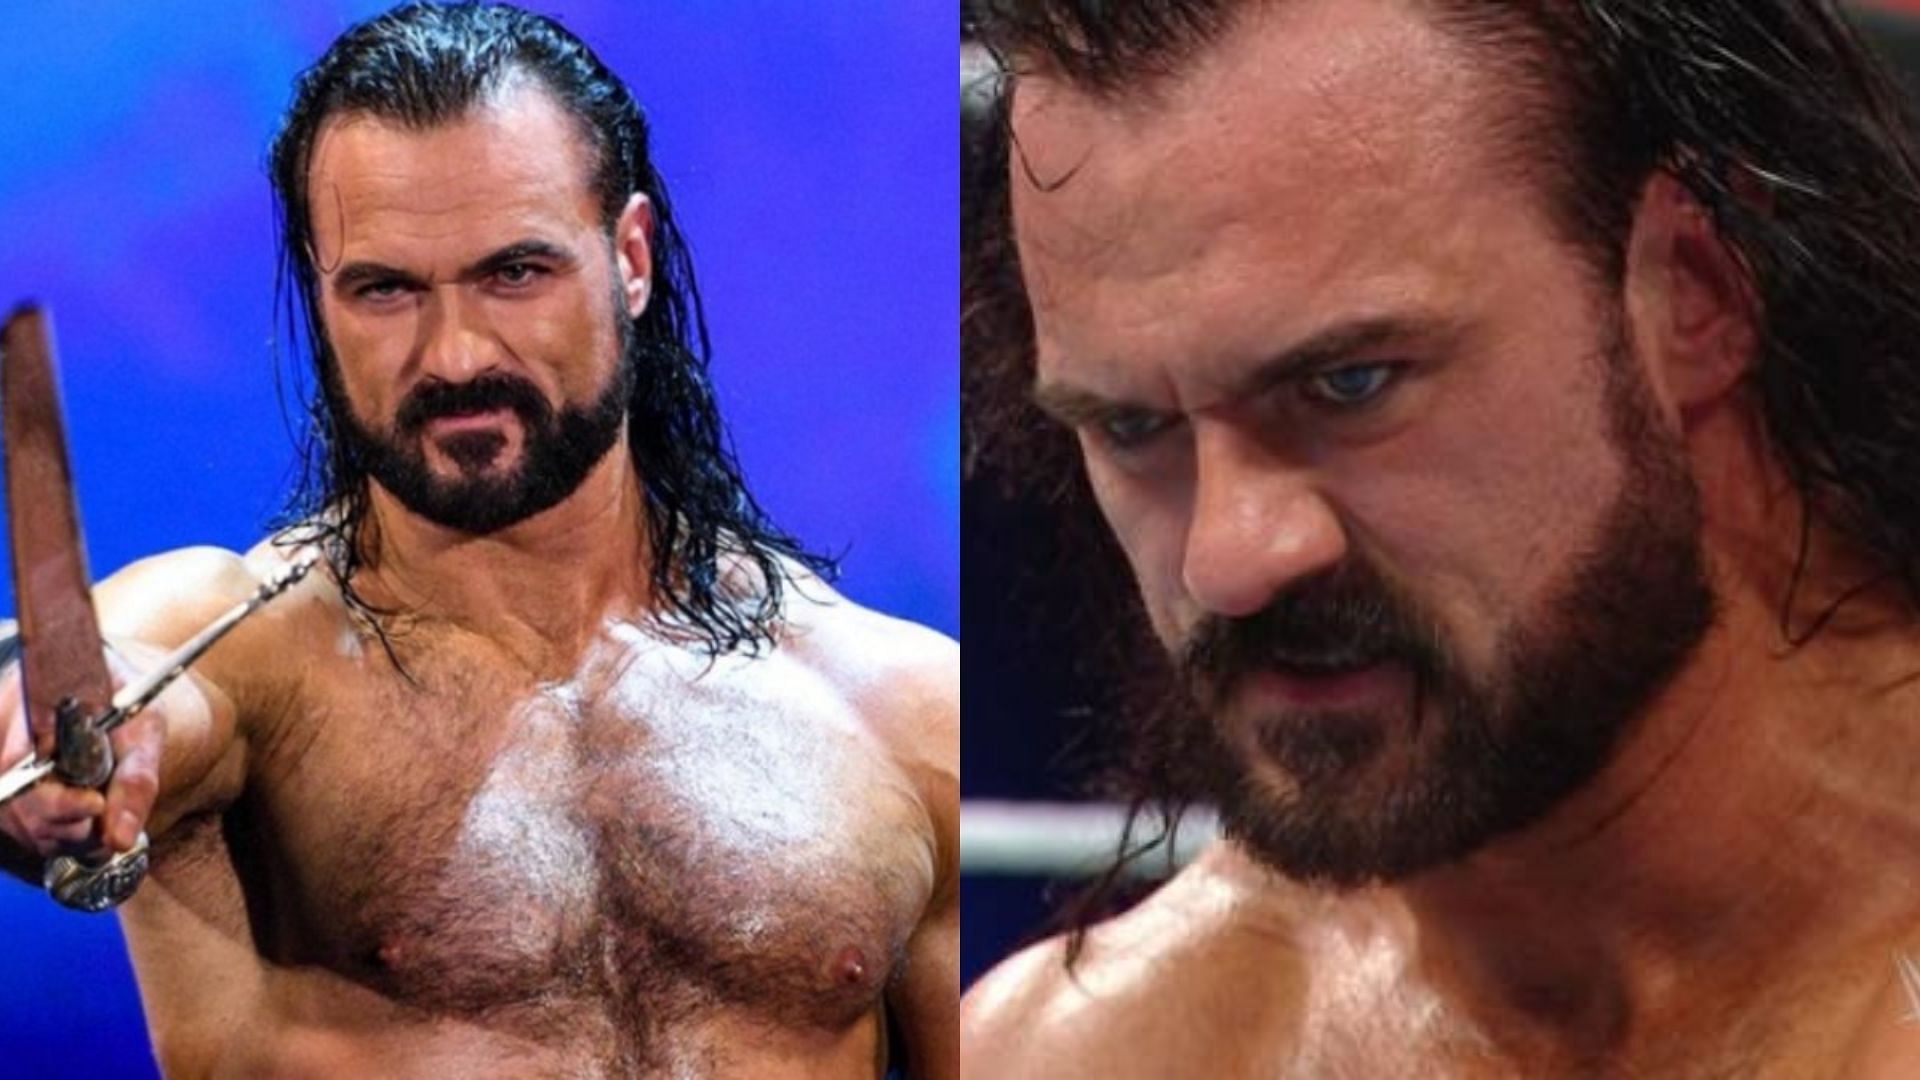 Drew McIntyre will be on The Judgment Day